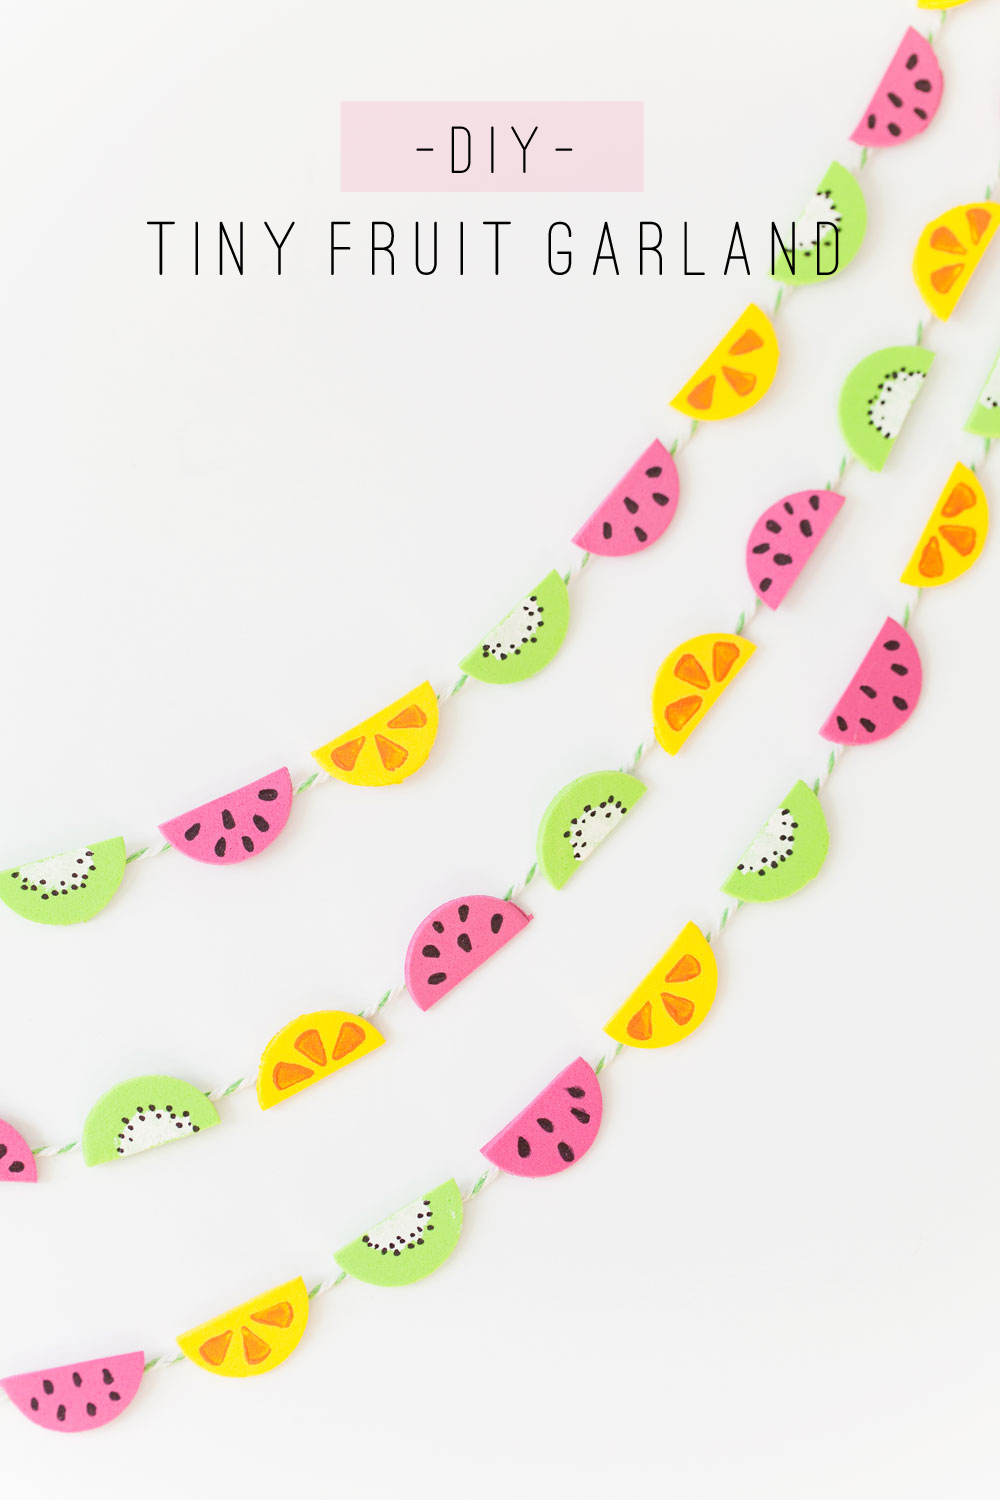 Tell-Love-and-Chocolate-This-tiny-fruit-garland-is-so-cute-and-easy-to-make-check-out-the-DIY1